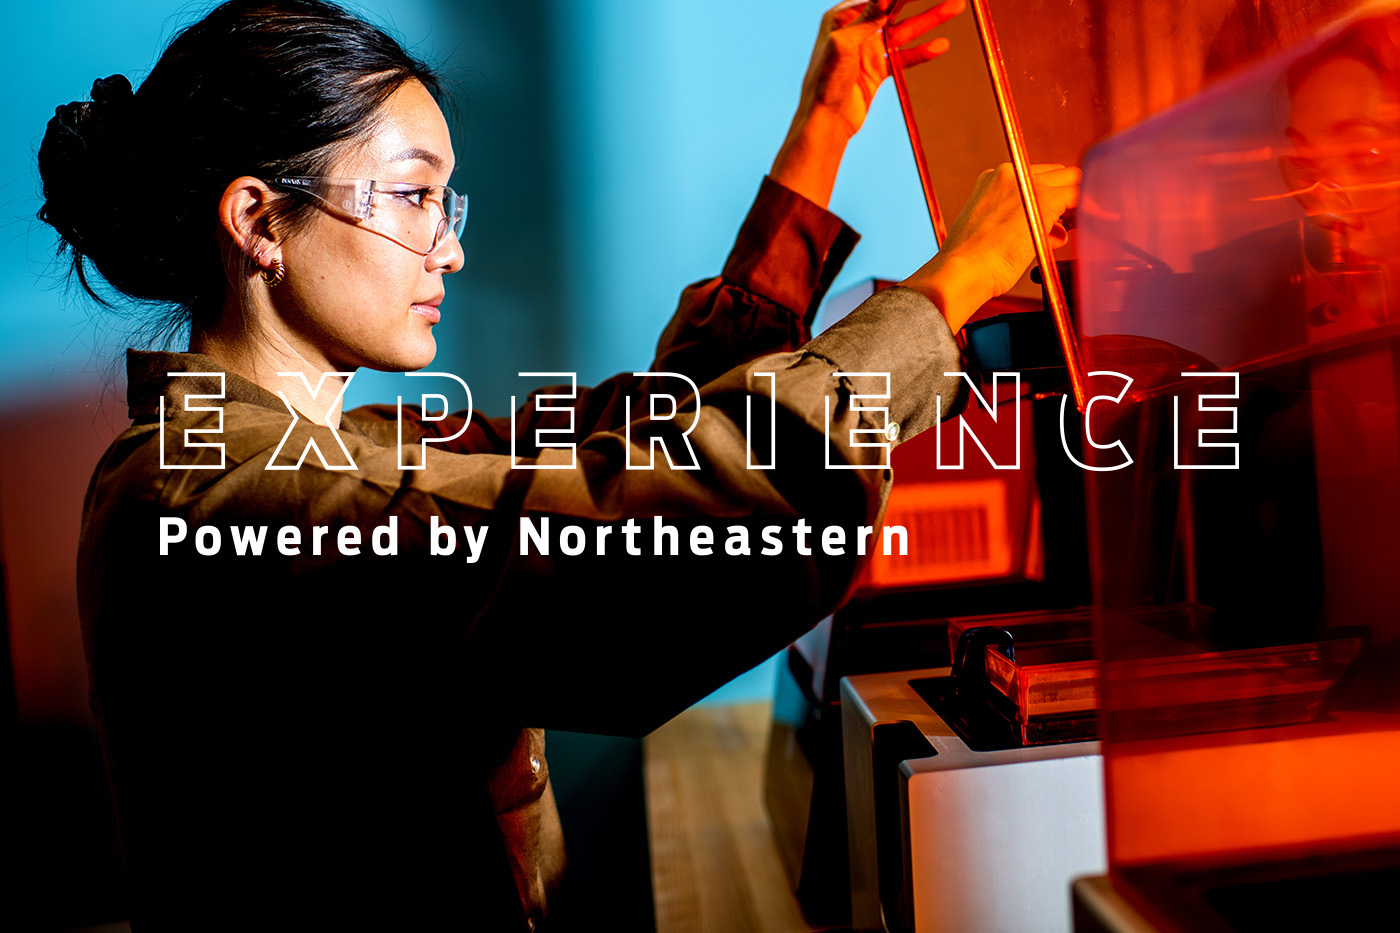 A student wearing goggles working in the lab, overlaid by the text EXPERIENCE Powered by Northeastern